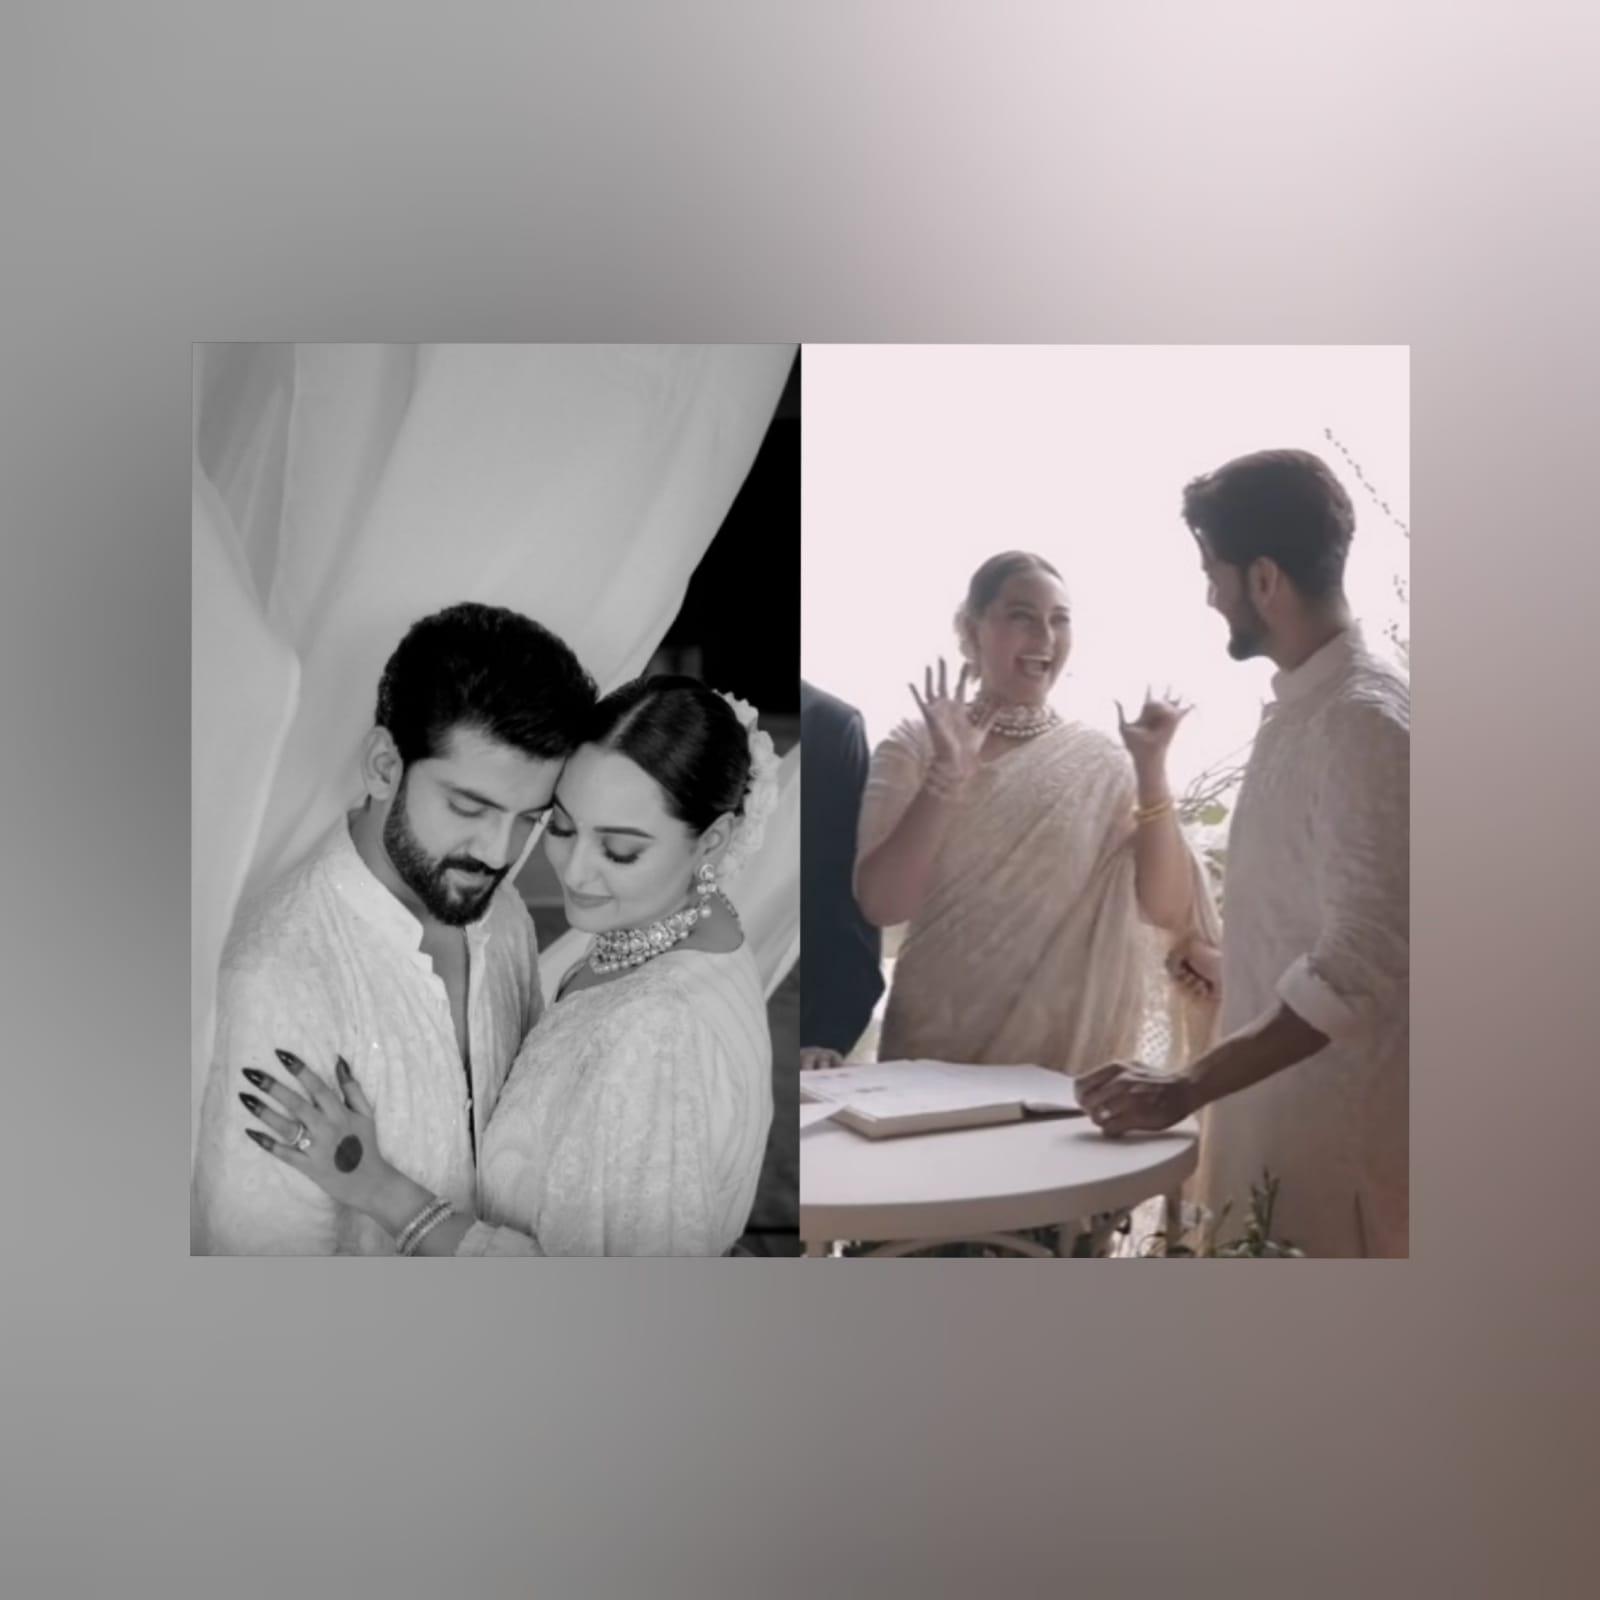 Sonakshi Sinha and Zaheer Iqbal Wedding Video Out!